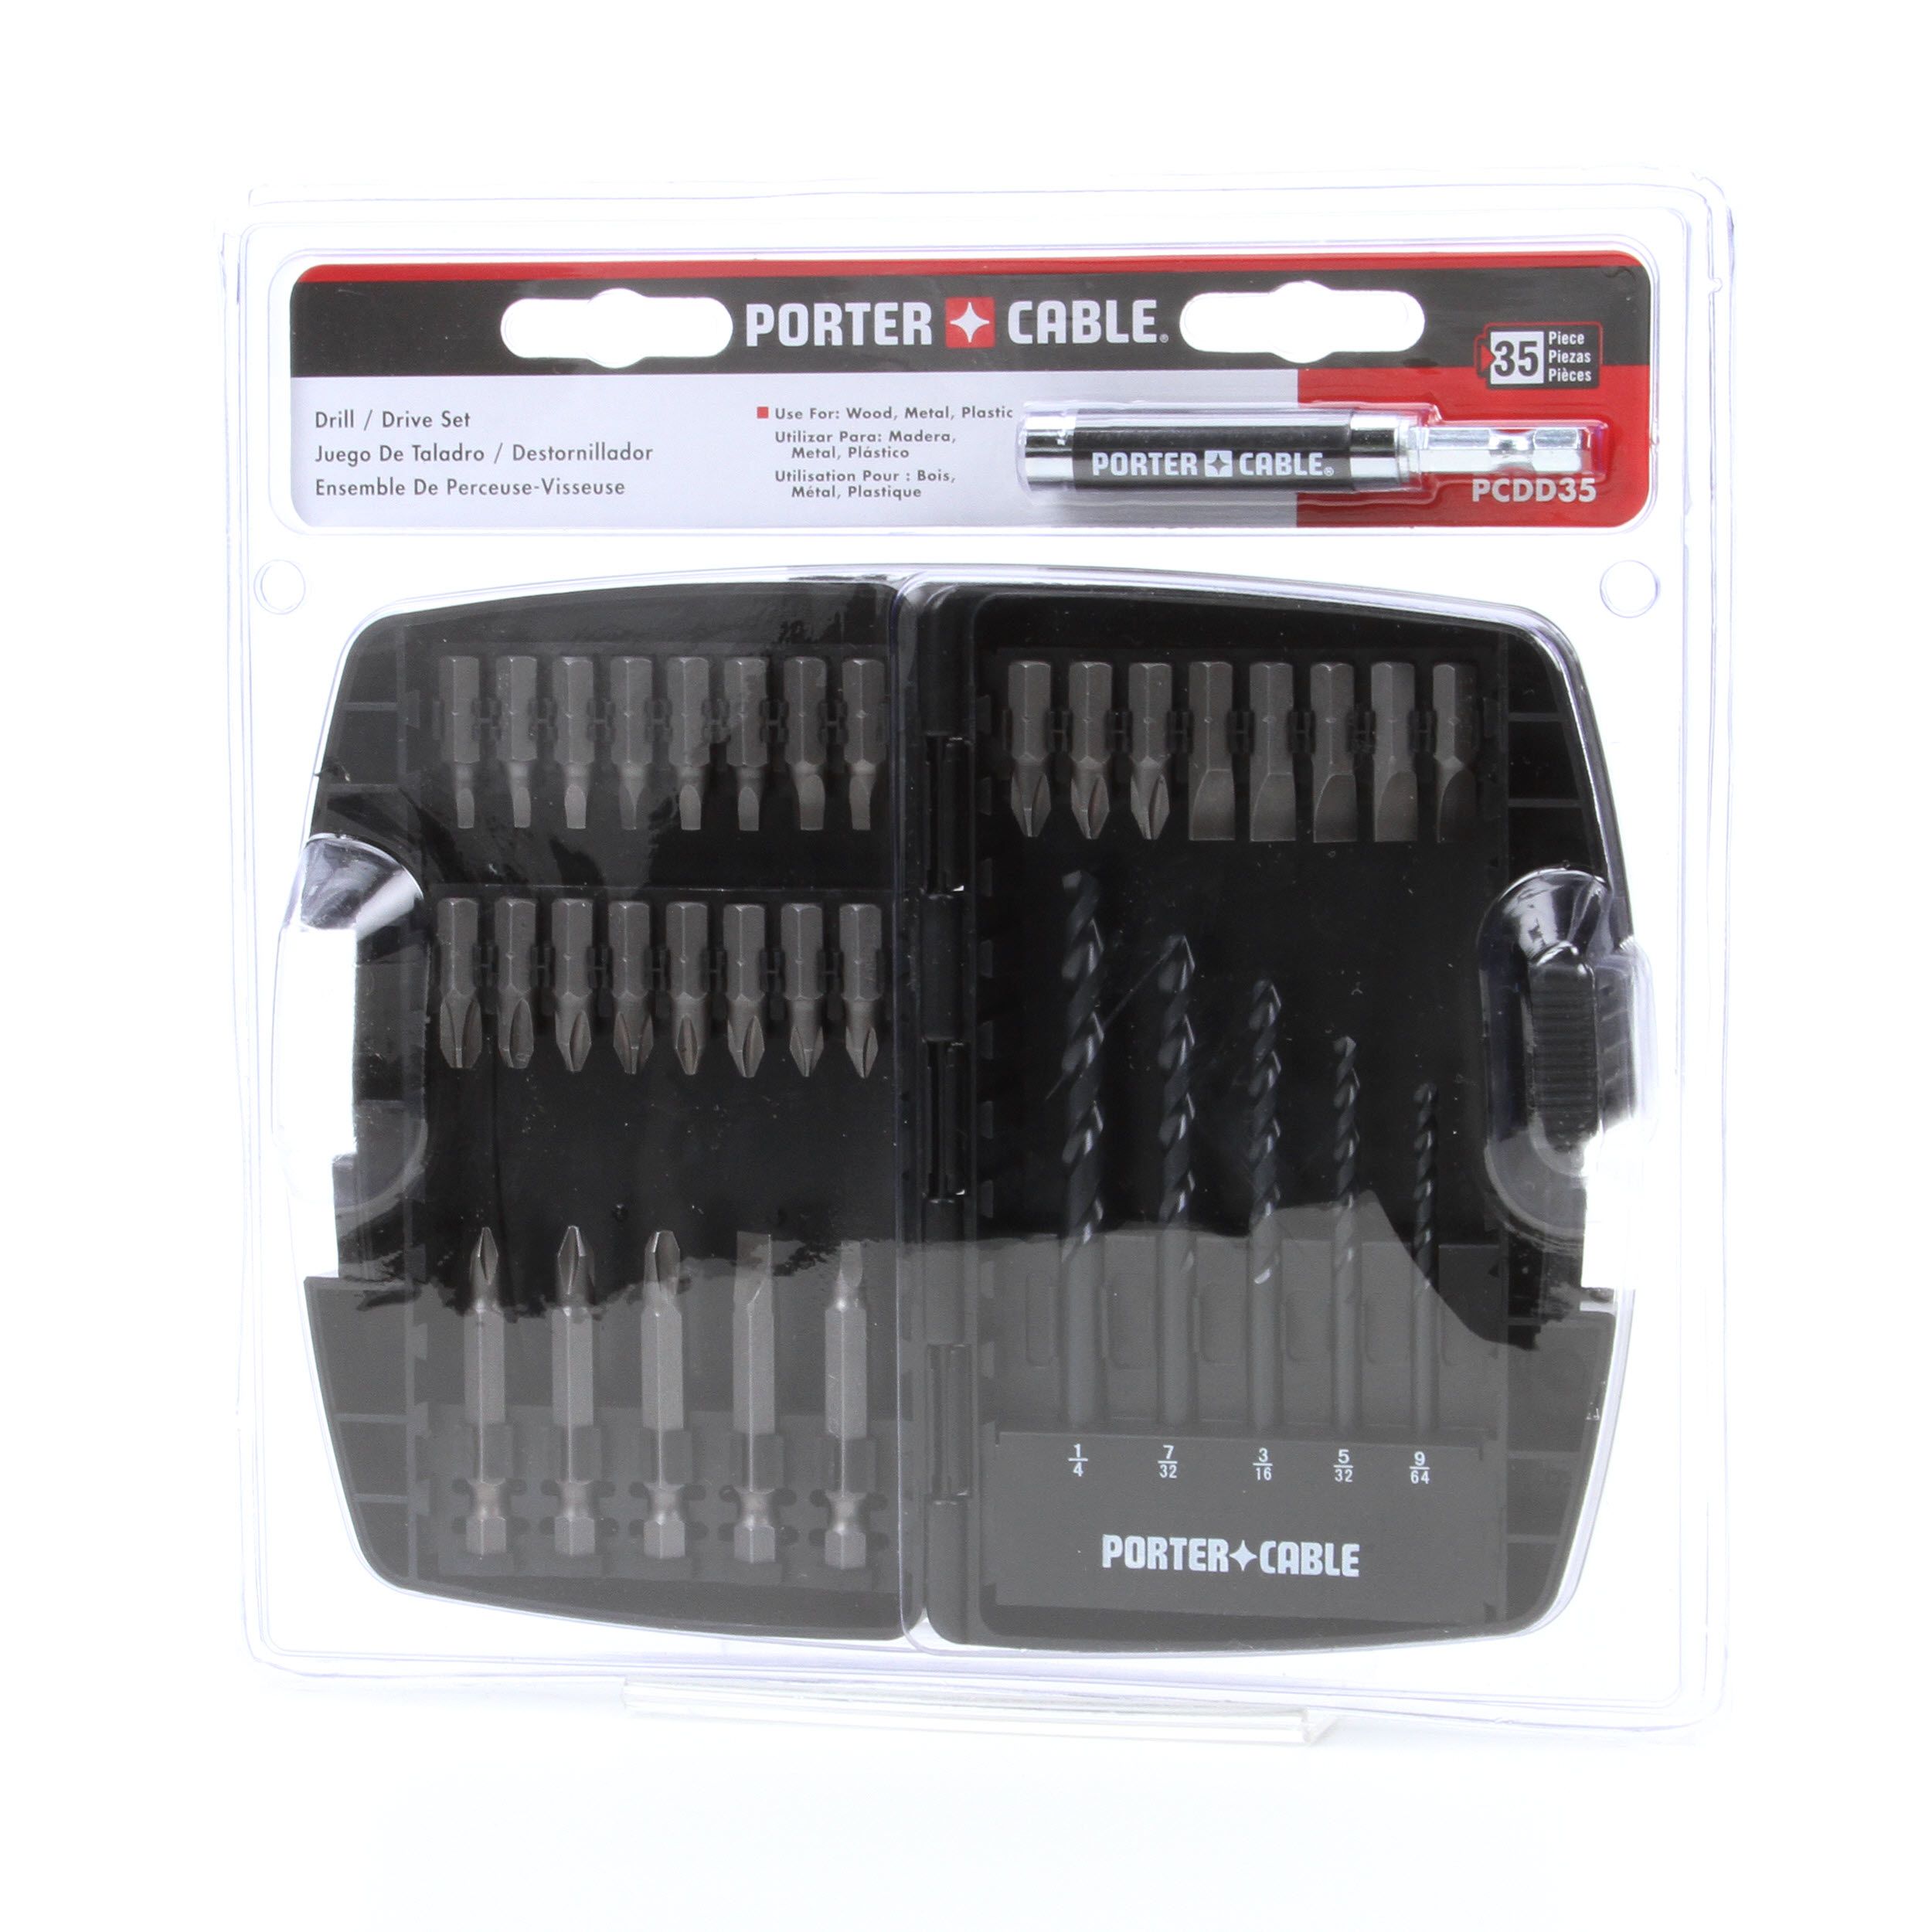 ten pack of porter cable 1/8" cutout bits 43221-10 